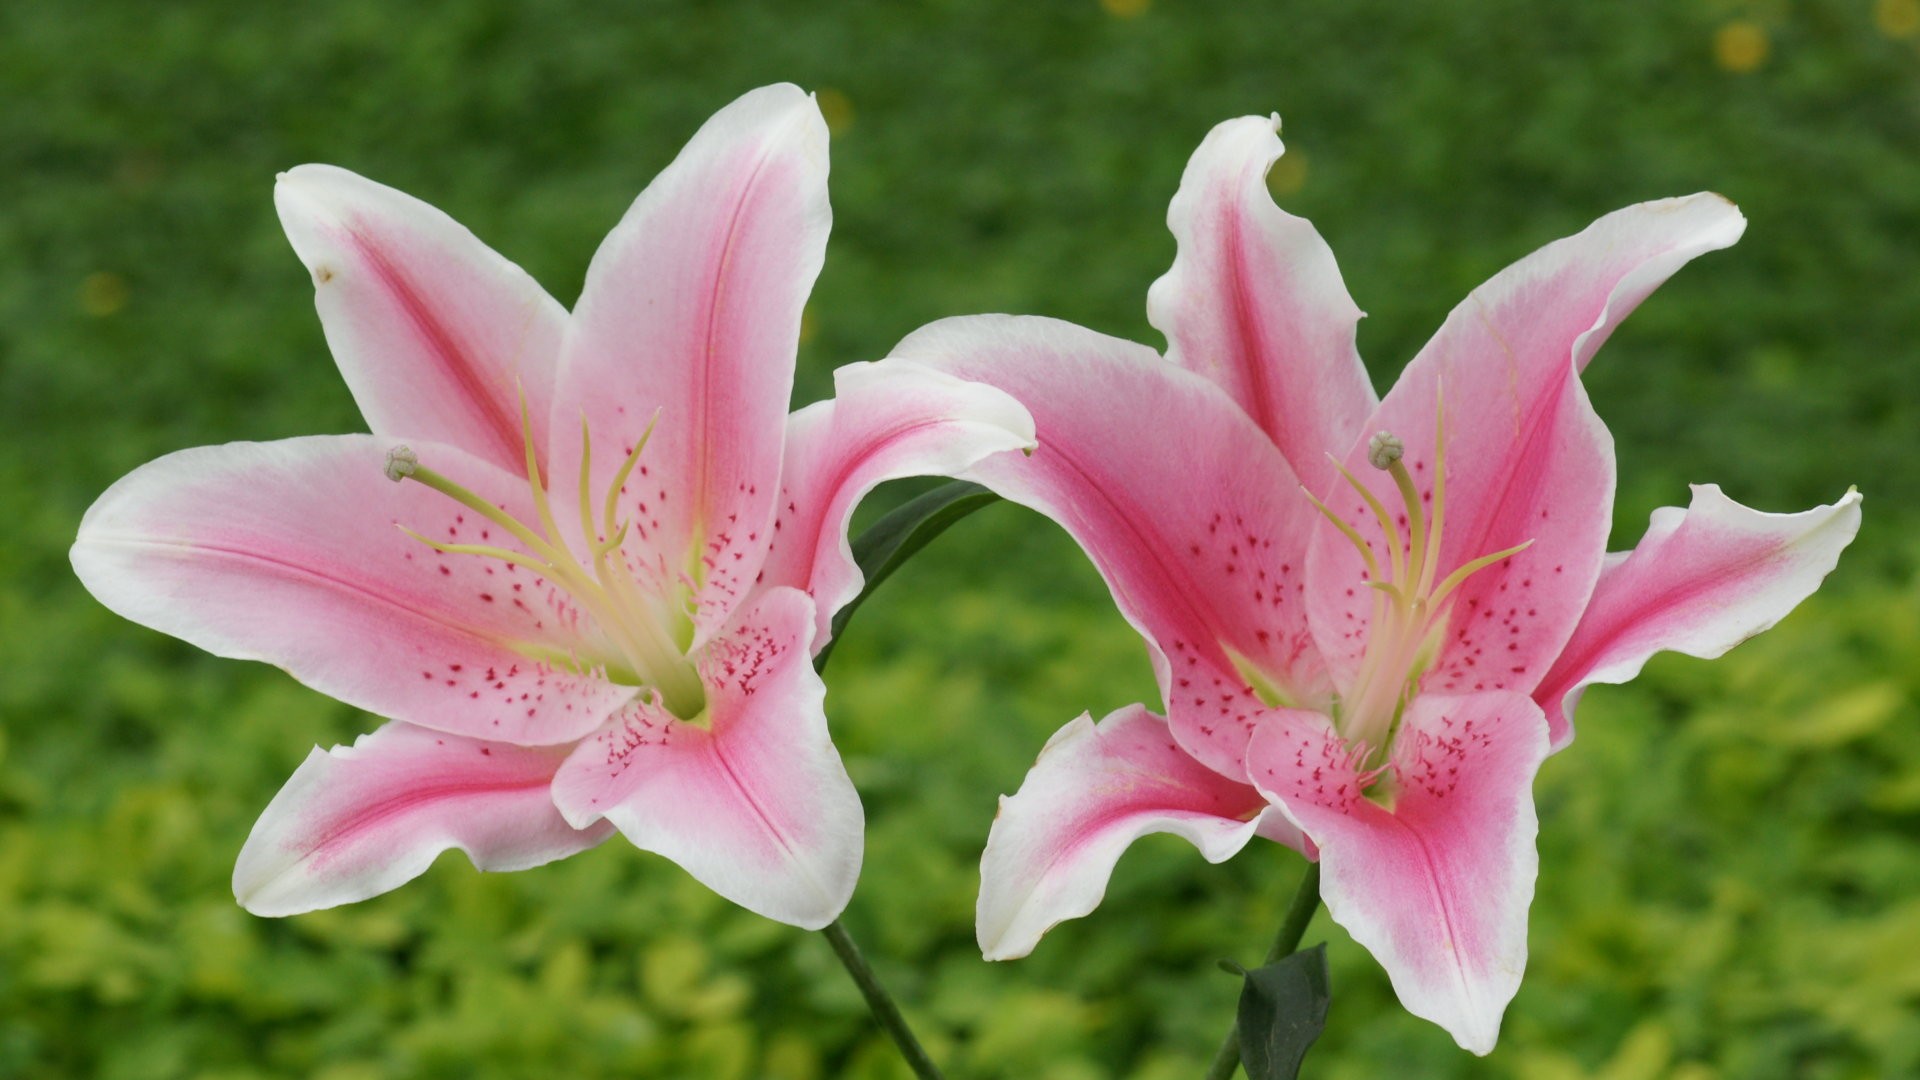 17+ images about LILY FLOWER on Pinterest | Flower wallpaper